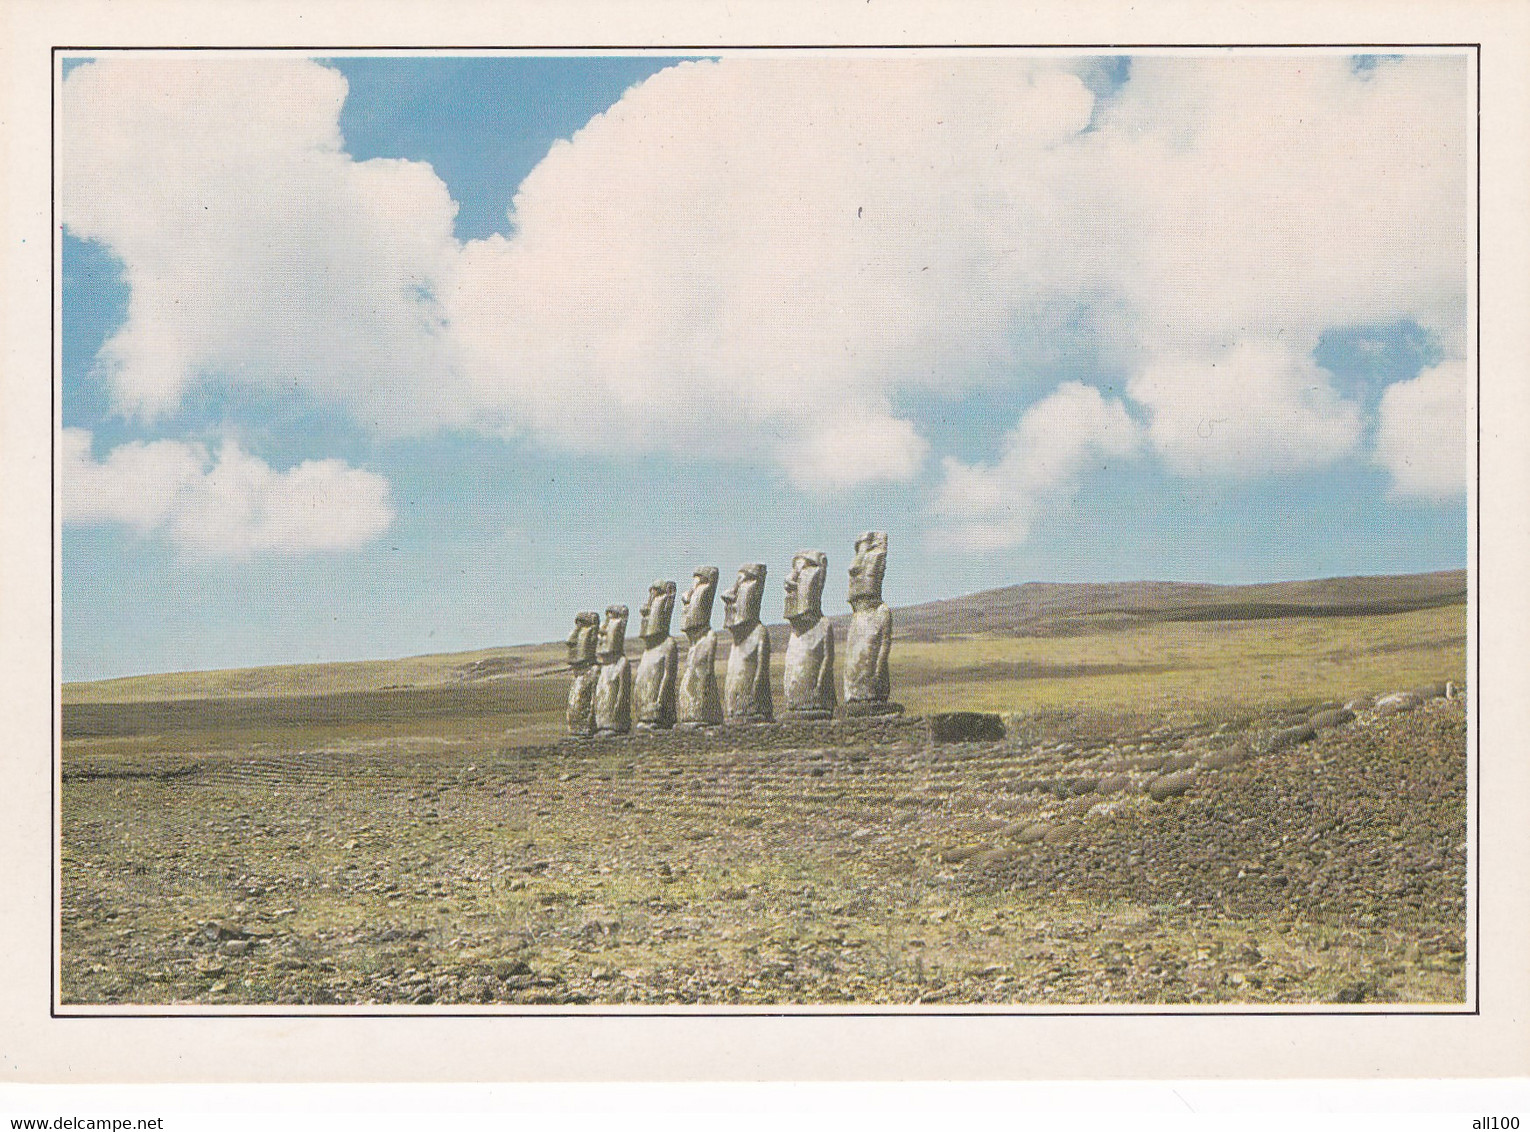 A20386 - MYSTERIOUS MEGALITHS ON EASTER ISLAND ETRANGES MEGALITHES RAPA NUI EASTER ISLAND ILE DE PAQUES - Rapa Nui